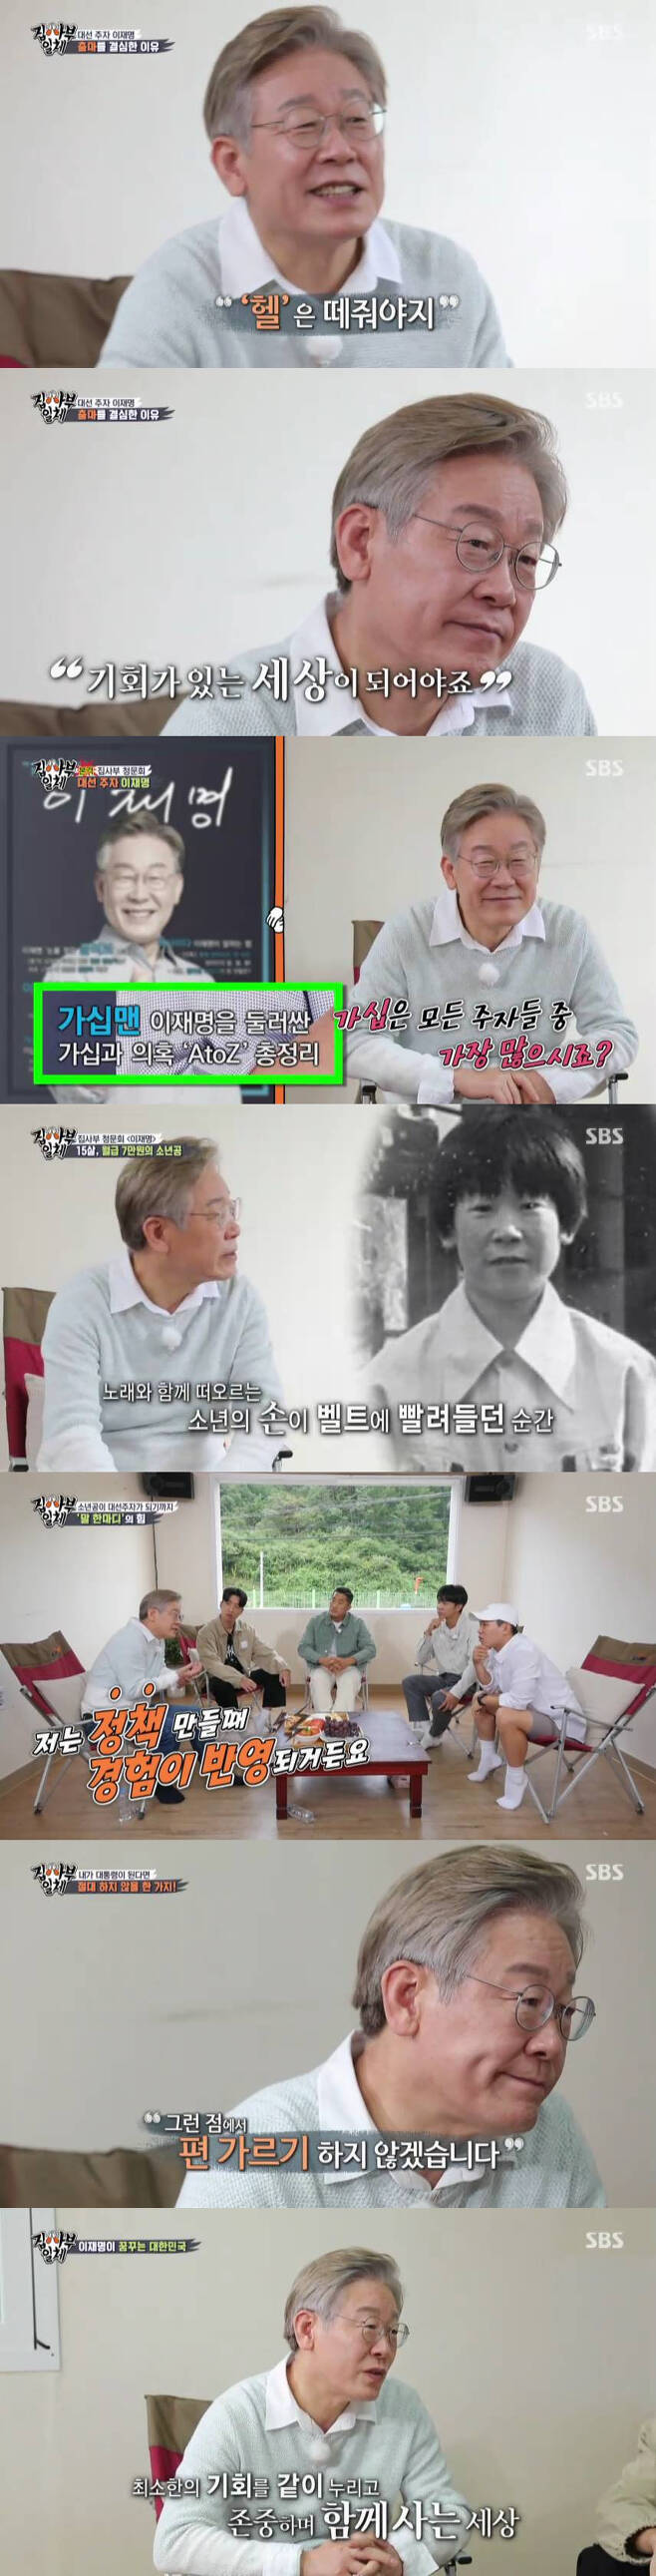 According to Nielsen Korea, a TV viewer rating company on the 27th, SBS entertainment program All The Butlers in the metropolitan area, which was broadcast on the 26th, attracted 10.1% of the audience ratings and 2049 target TV viewer ratings, which are topical and competitive indicators, were 4.1%.Top TV viewer ratings per minute soared to 13.5 per cent.Lee Jae-myung, the governor of Gyeonggi Province, appeared as master on the day of the special feature of For runner after last week.The place where the members met Lee Jae-myung was Andong Station.Lee Jae-myung, who spent his childhood at Andong Station, said, I wanted to show you what it is. It is not really rough, it is very timid and emotional.He knew me as a very rough person. It is an opportunity to show that I am not such a person. He has been honest about the various issues surrounding him through the All The Butlers hearing as well as the story of his life in difficult environments since he was a boy.Lee Jae-myung said, I was hurt when I was a factory worker and was suffering from disability. I thought it was difficult at the time, but when I went to college, I had a social structural problem.I wanted to change the world, he said. There are young people who call this country we live in hell.If I believe I can make something by making reasonable efforts, I will not. The hope for escape from hell has disappeared.A full-scale All The Butlers hearing has since begun.Members asked about former prosecutor general Yoon Seok-ryul and former Democratic Party leader Lee Nak-yeon as a common question for For.Lee Jae-myung cited the strength he wanted to bring from Lee Nak-yeon as a race, and that it would be fair for Yoon Seok-ryul.He said that he is a competitor to win about Yoon Seok-ryul and a competitor to win about Lee Nak-yeon. There is no reason to win because it is an internal competition with Lee Nak-yeon.Lee Jae-myung said, I will not side when asked if I will never do it if I become president. When I compete, I represent the Democratic Party but I represent everyone when I become president.I will not cut it in that regard. Finally, Lee Jae-myung asked the question I dream of Korea and said, It is a common sense world where you do not lose the rule if you break the rule.Everyone is in a world where they enjoy, respect and live together with the least opportunity. Meanwhile, Lee Nak-yeon, former Democratic Party leader, will appear on October 3, following former prosecutor general Yoon Seok-ryul and Lee Jae-myung, governor of Gyeonggi Province.